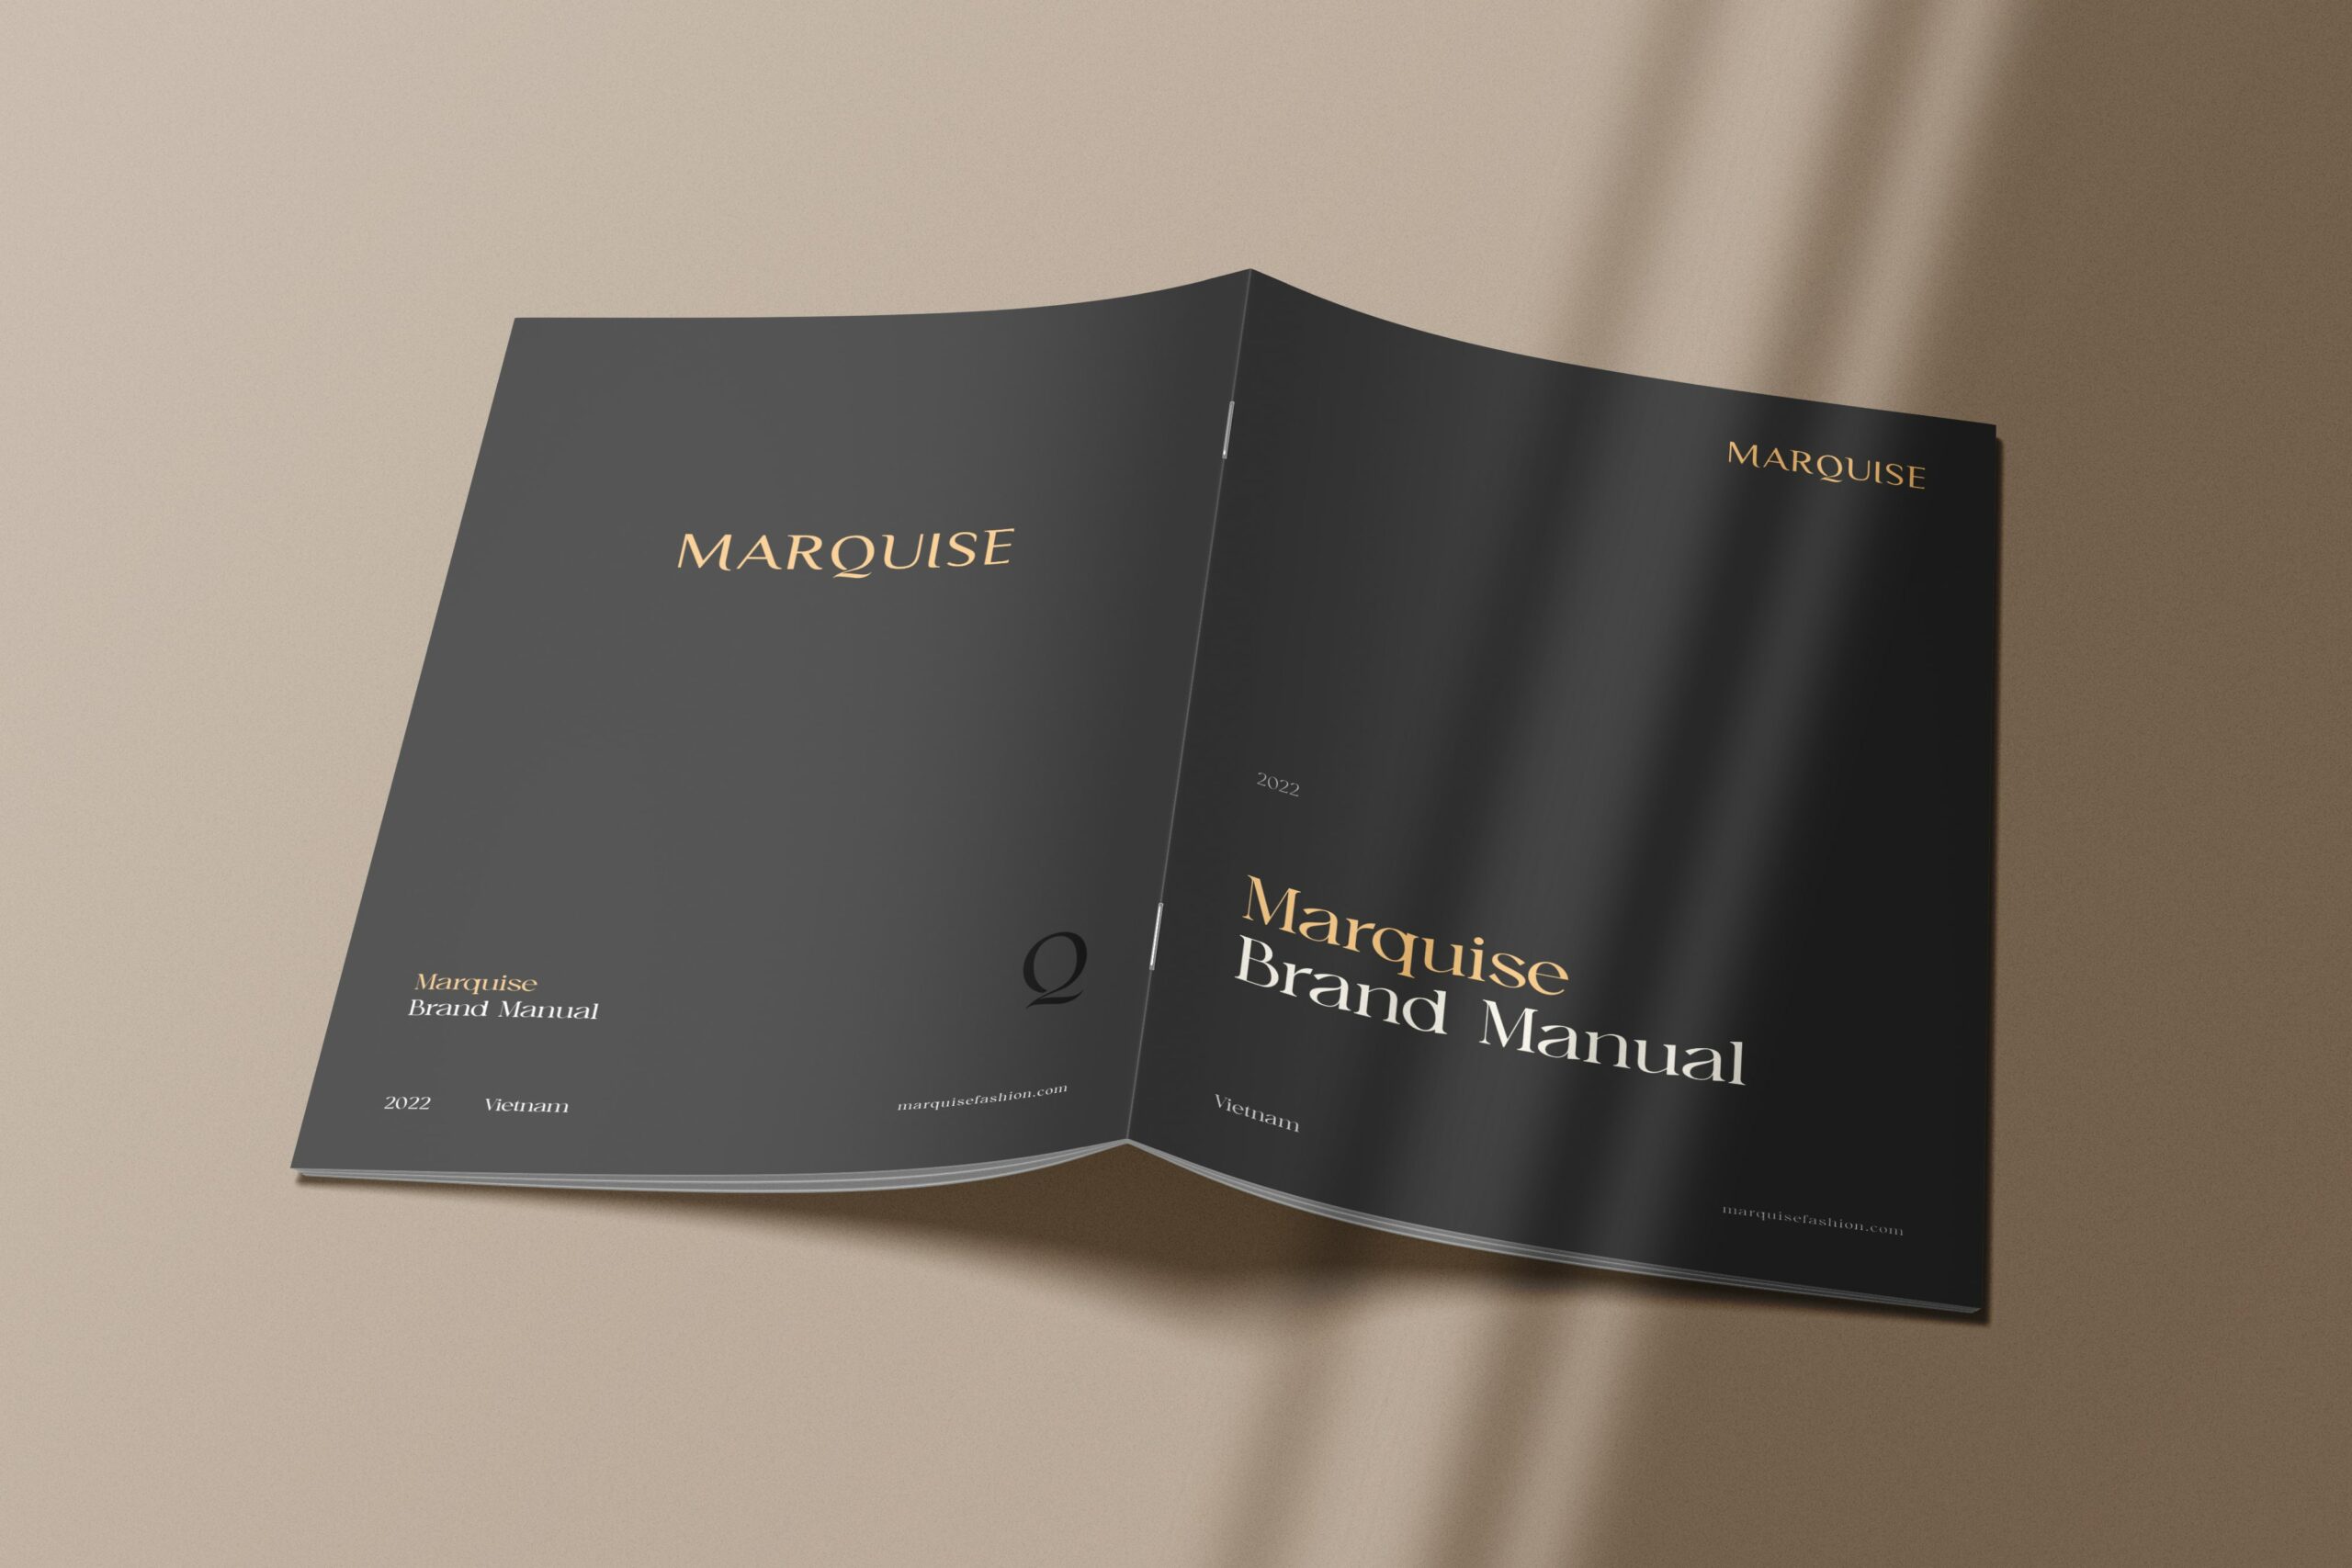 Brand-Manual-Marquise-02-min